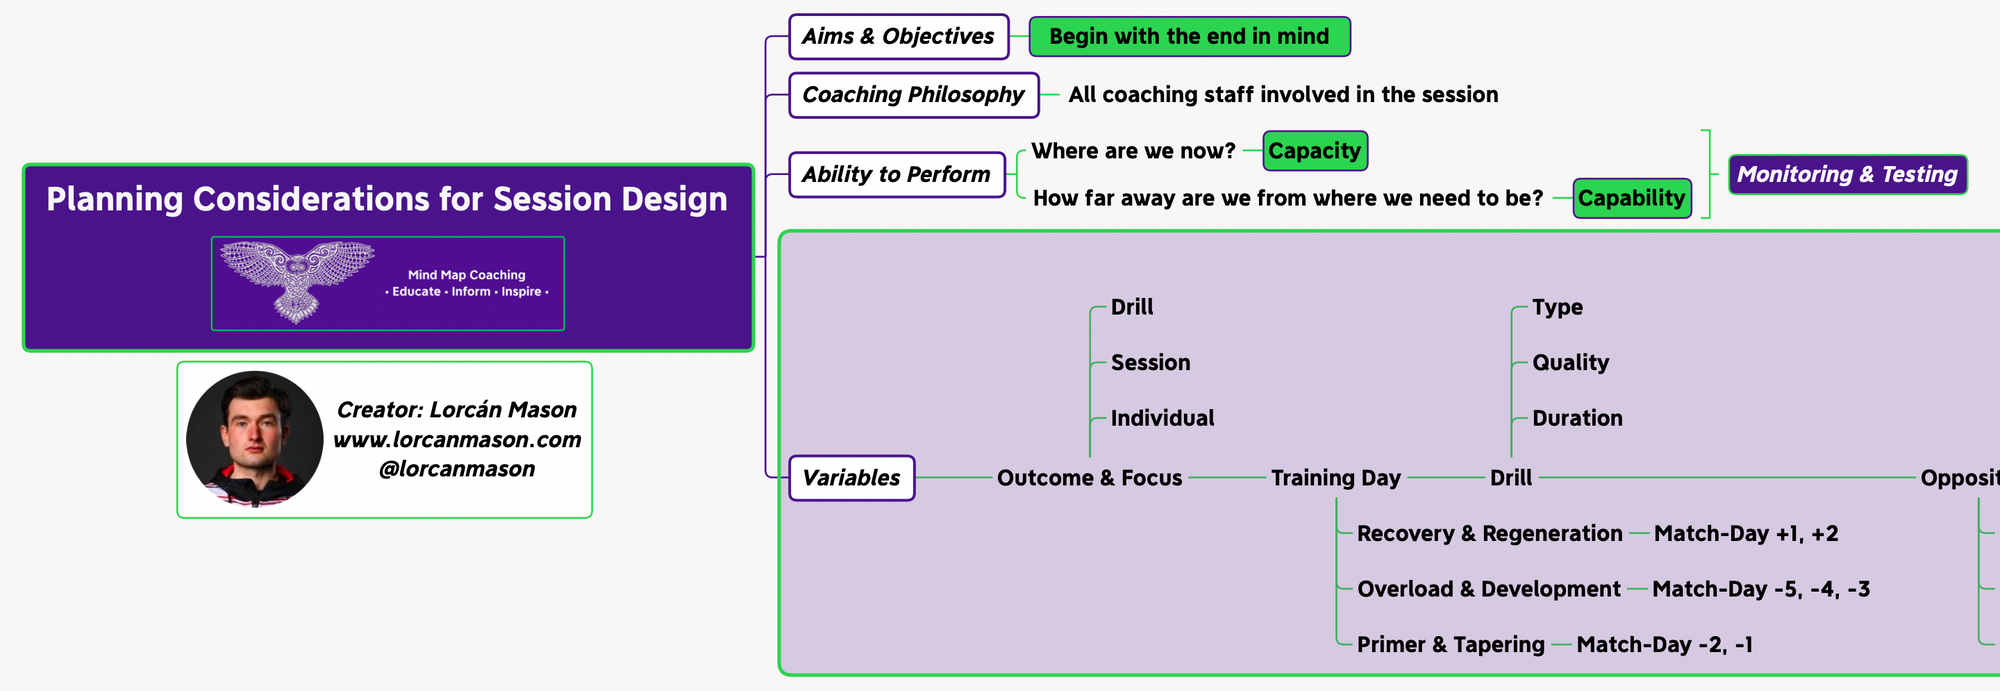 Planning Considerations for Session Design